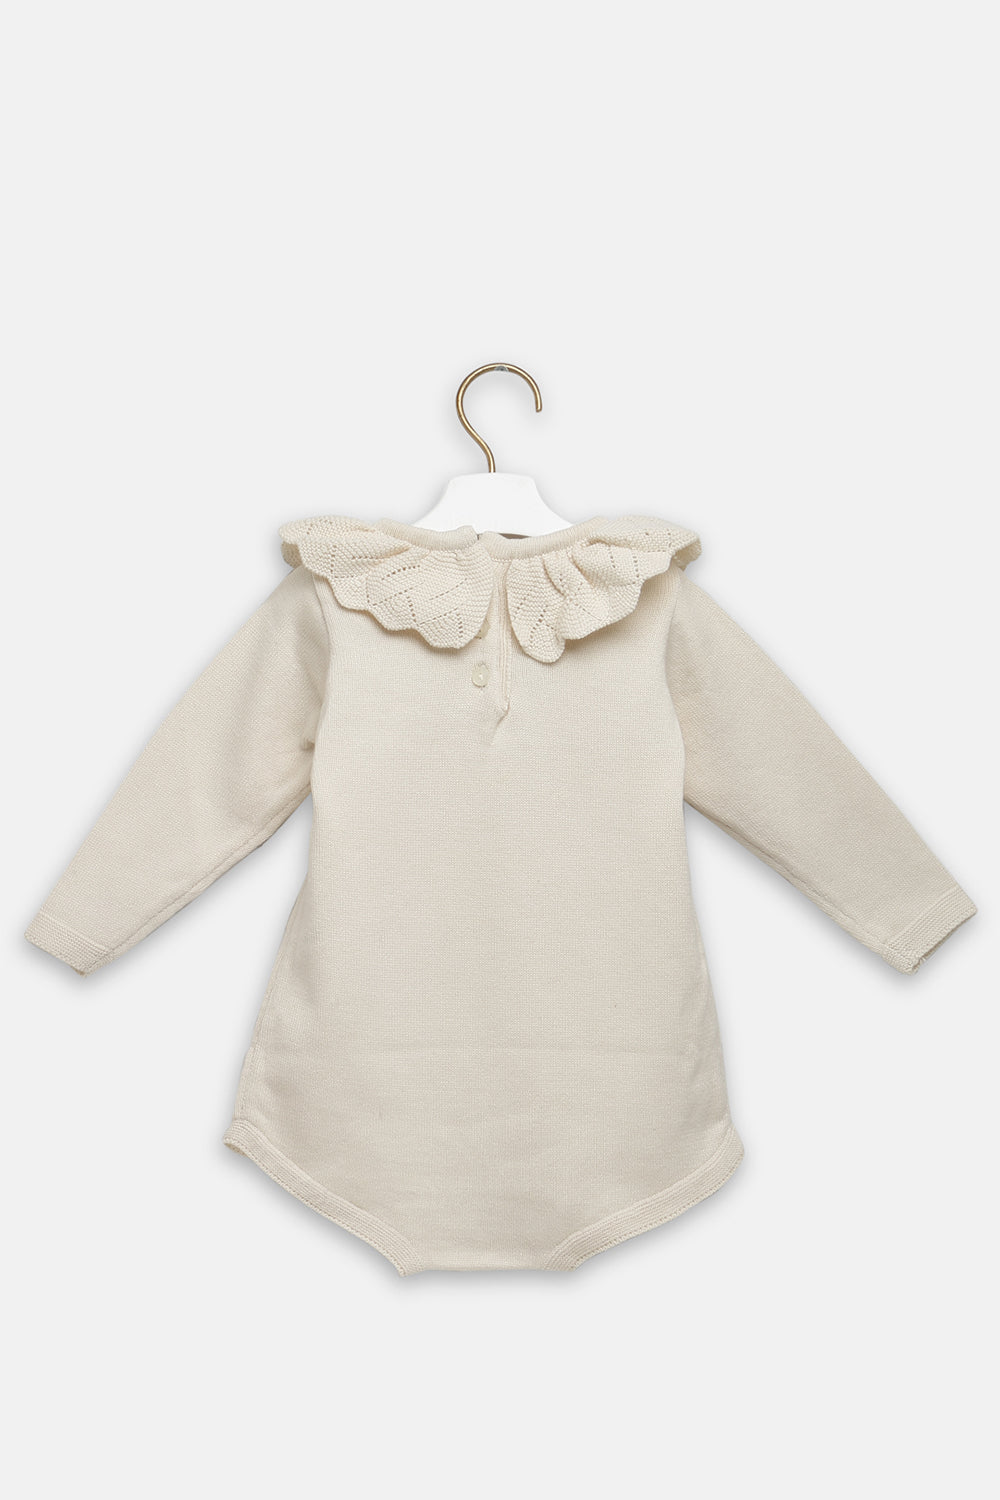 Cotton Ploma Romper For Baby Online